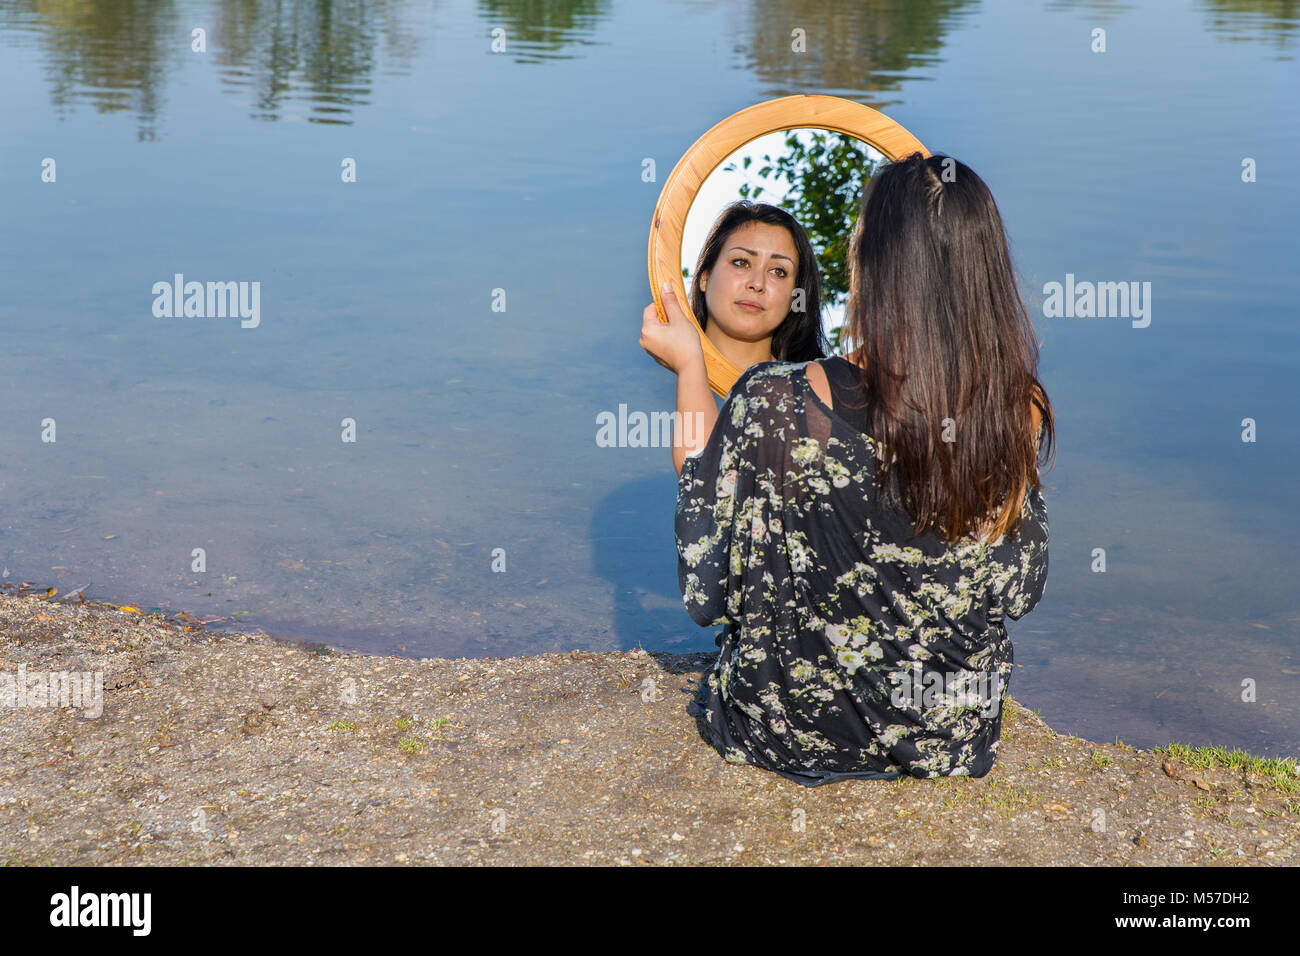 Woman looking in mirror at water Stock Photo